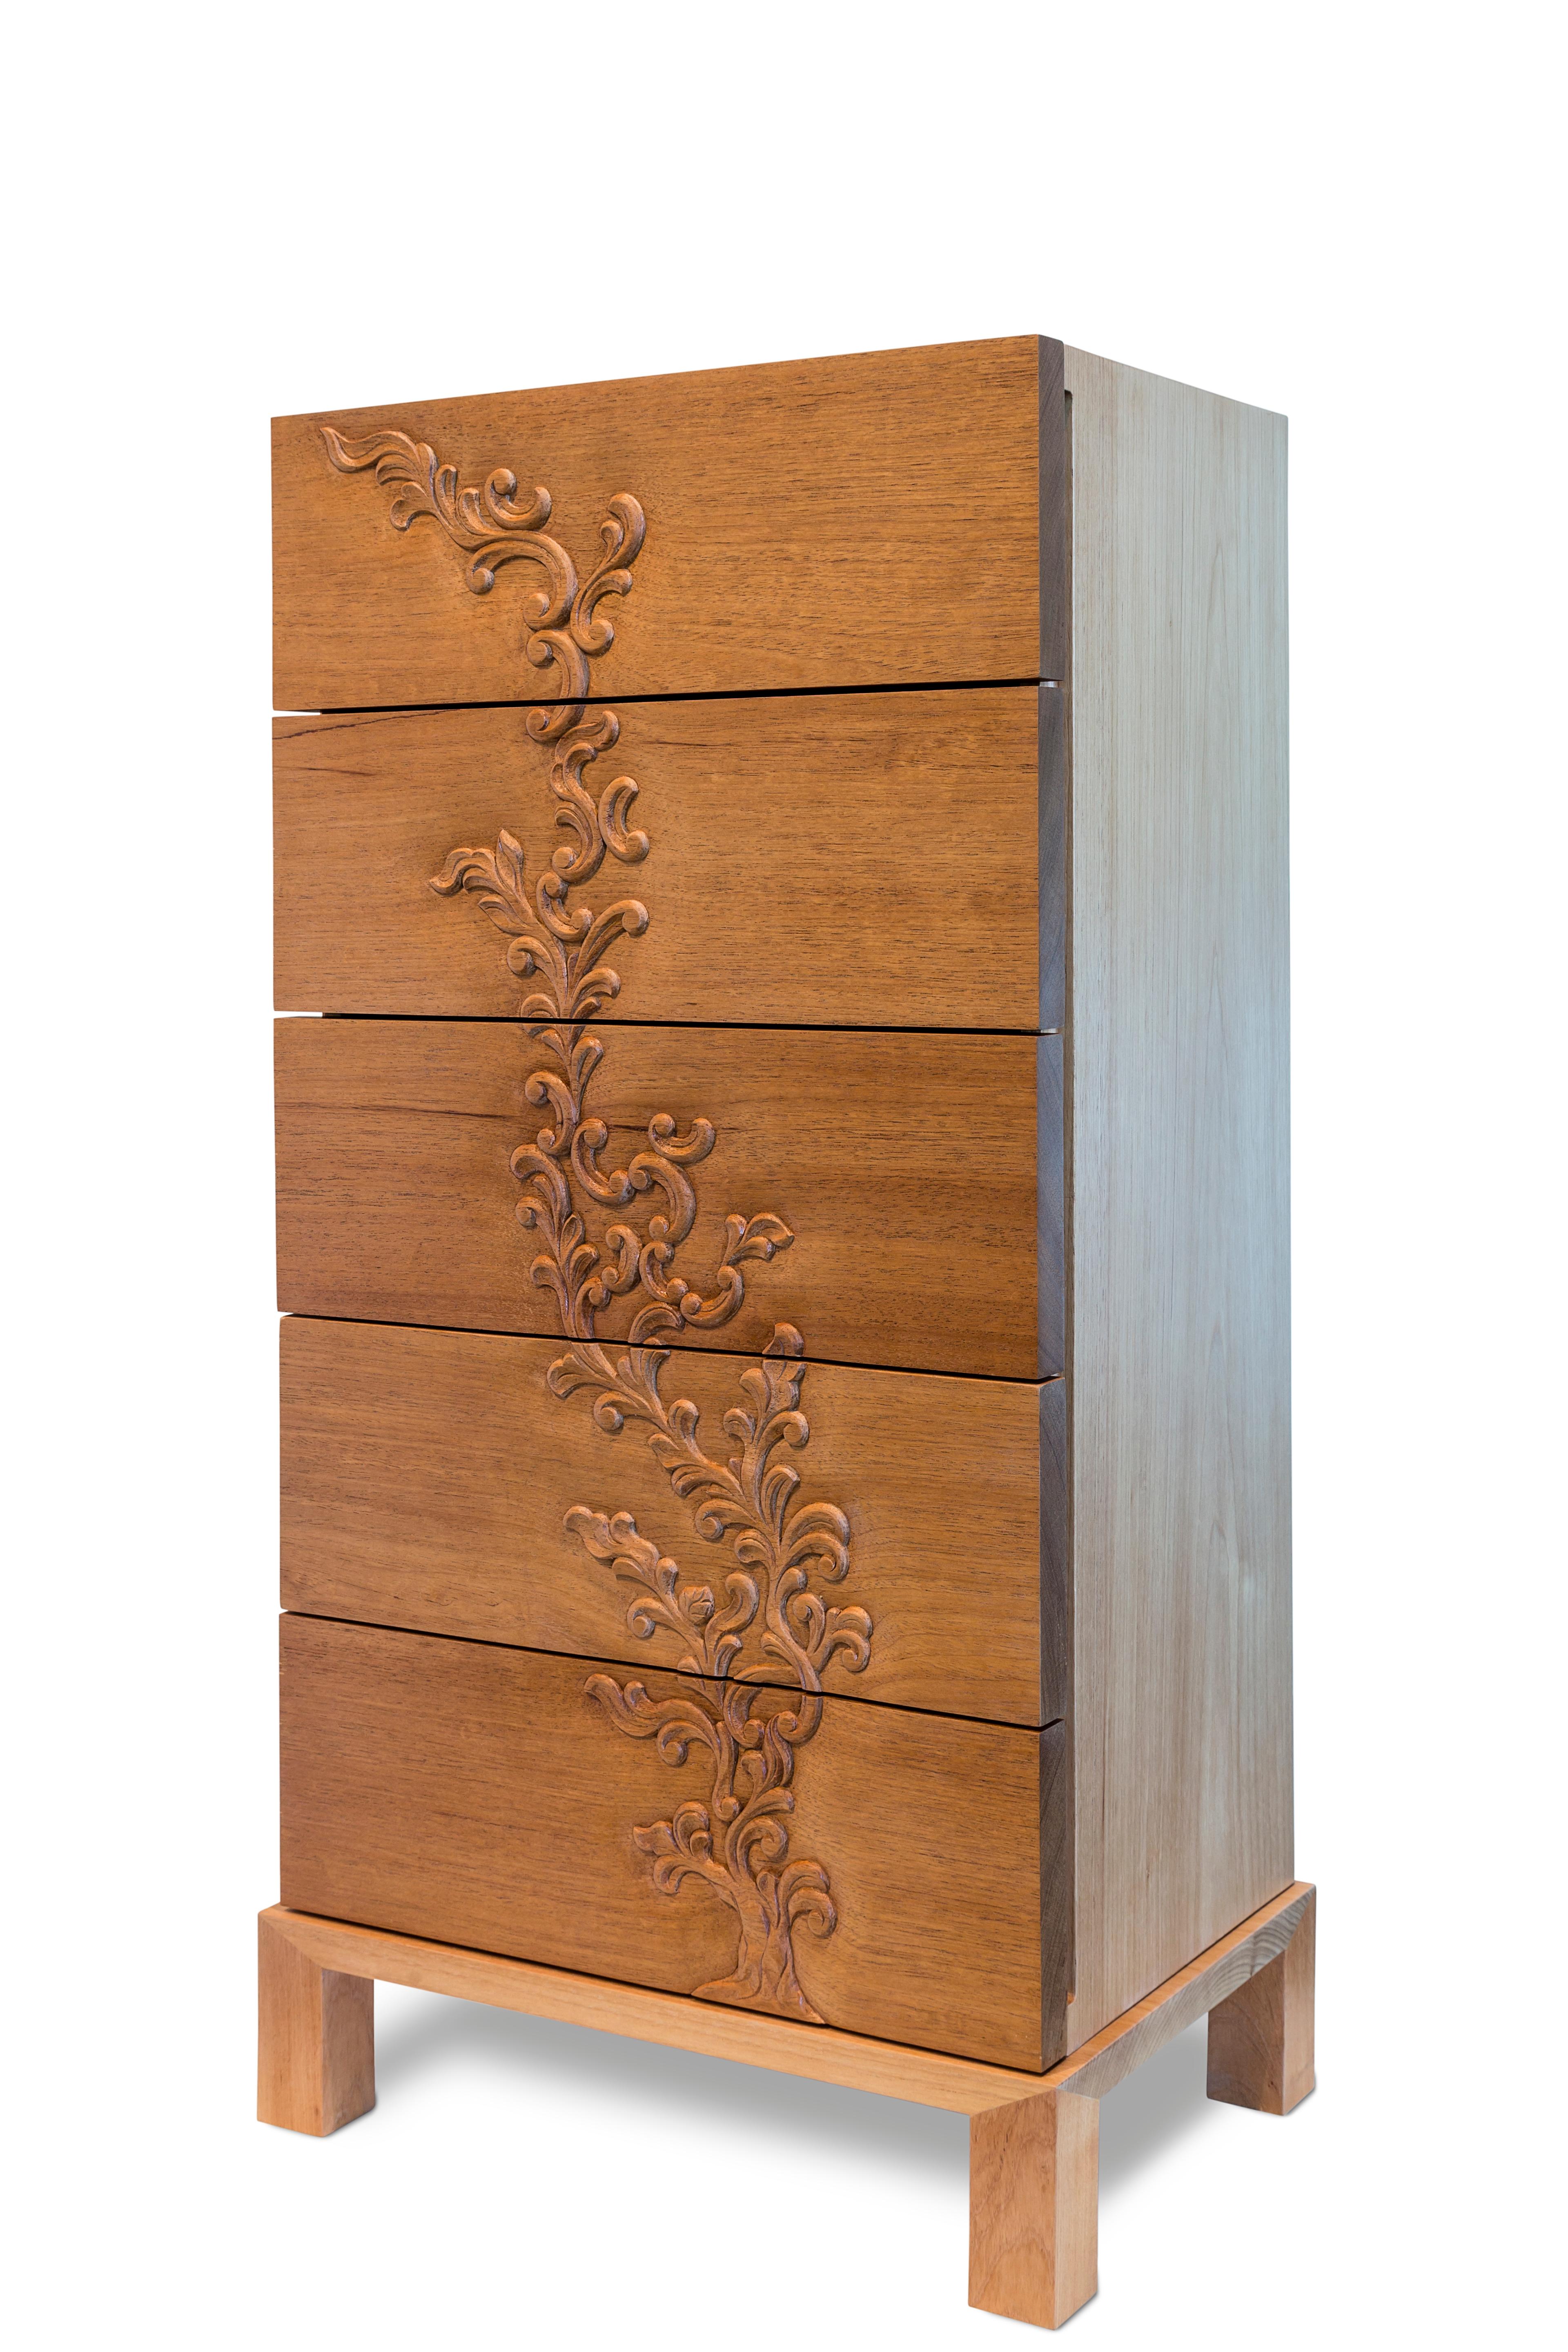 This chest of drawers is made in solid pink cedar wood carved by the craftsman Rondinelly Santos (Tiradentes, MG) specialized in sacred art.

The flowing design of the acanthus scrolls and leaves comes alive through the notch and runs through the